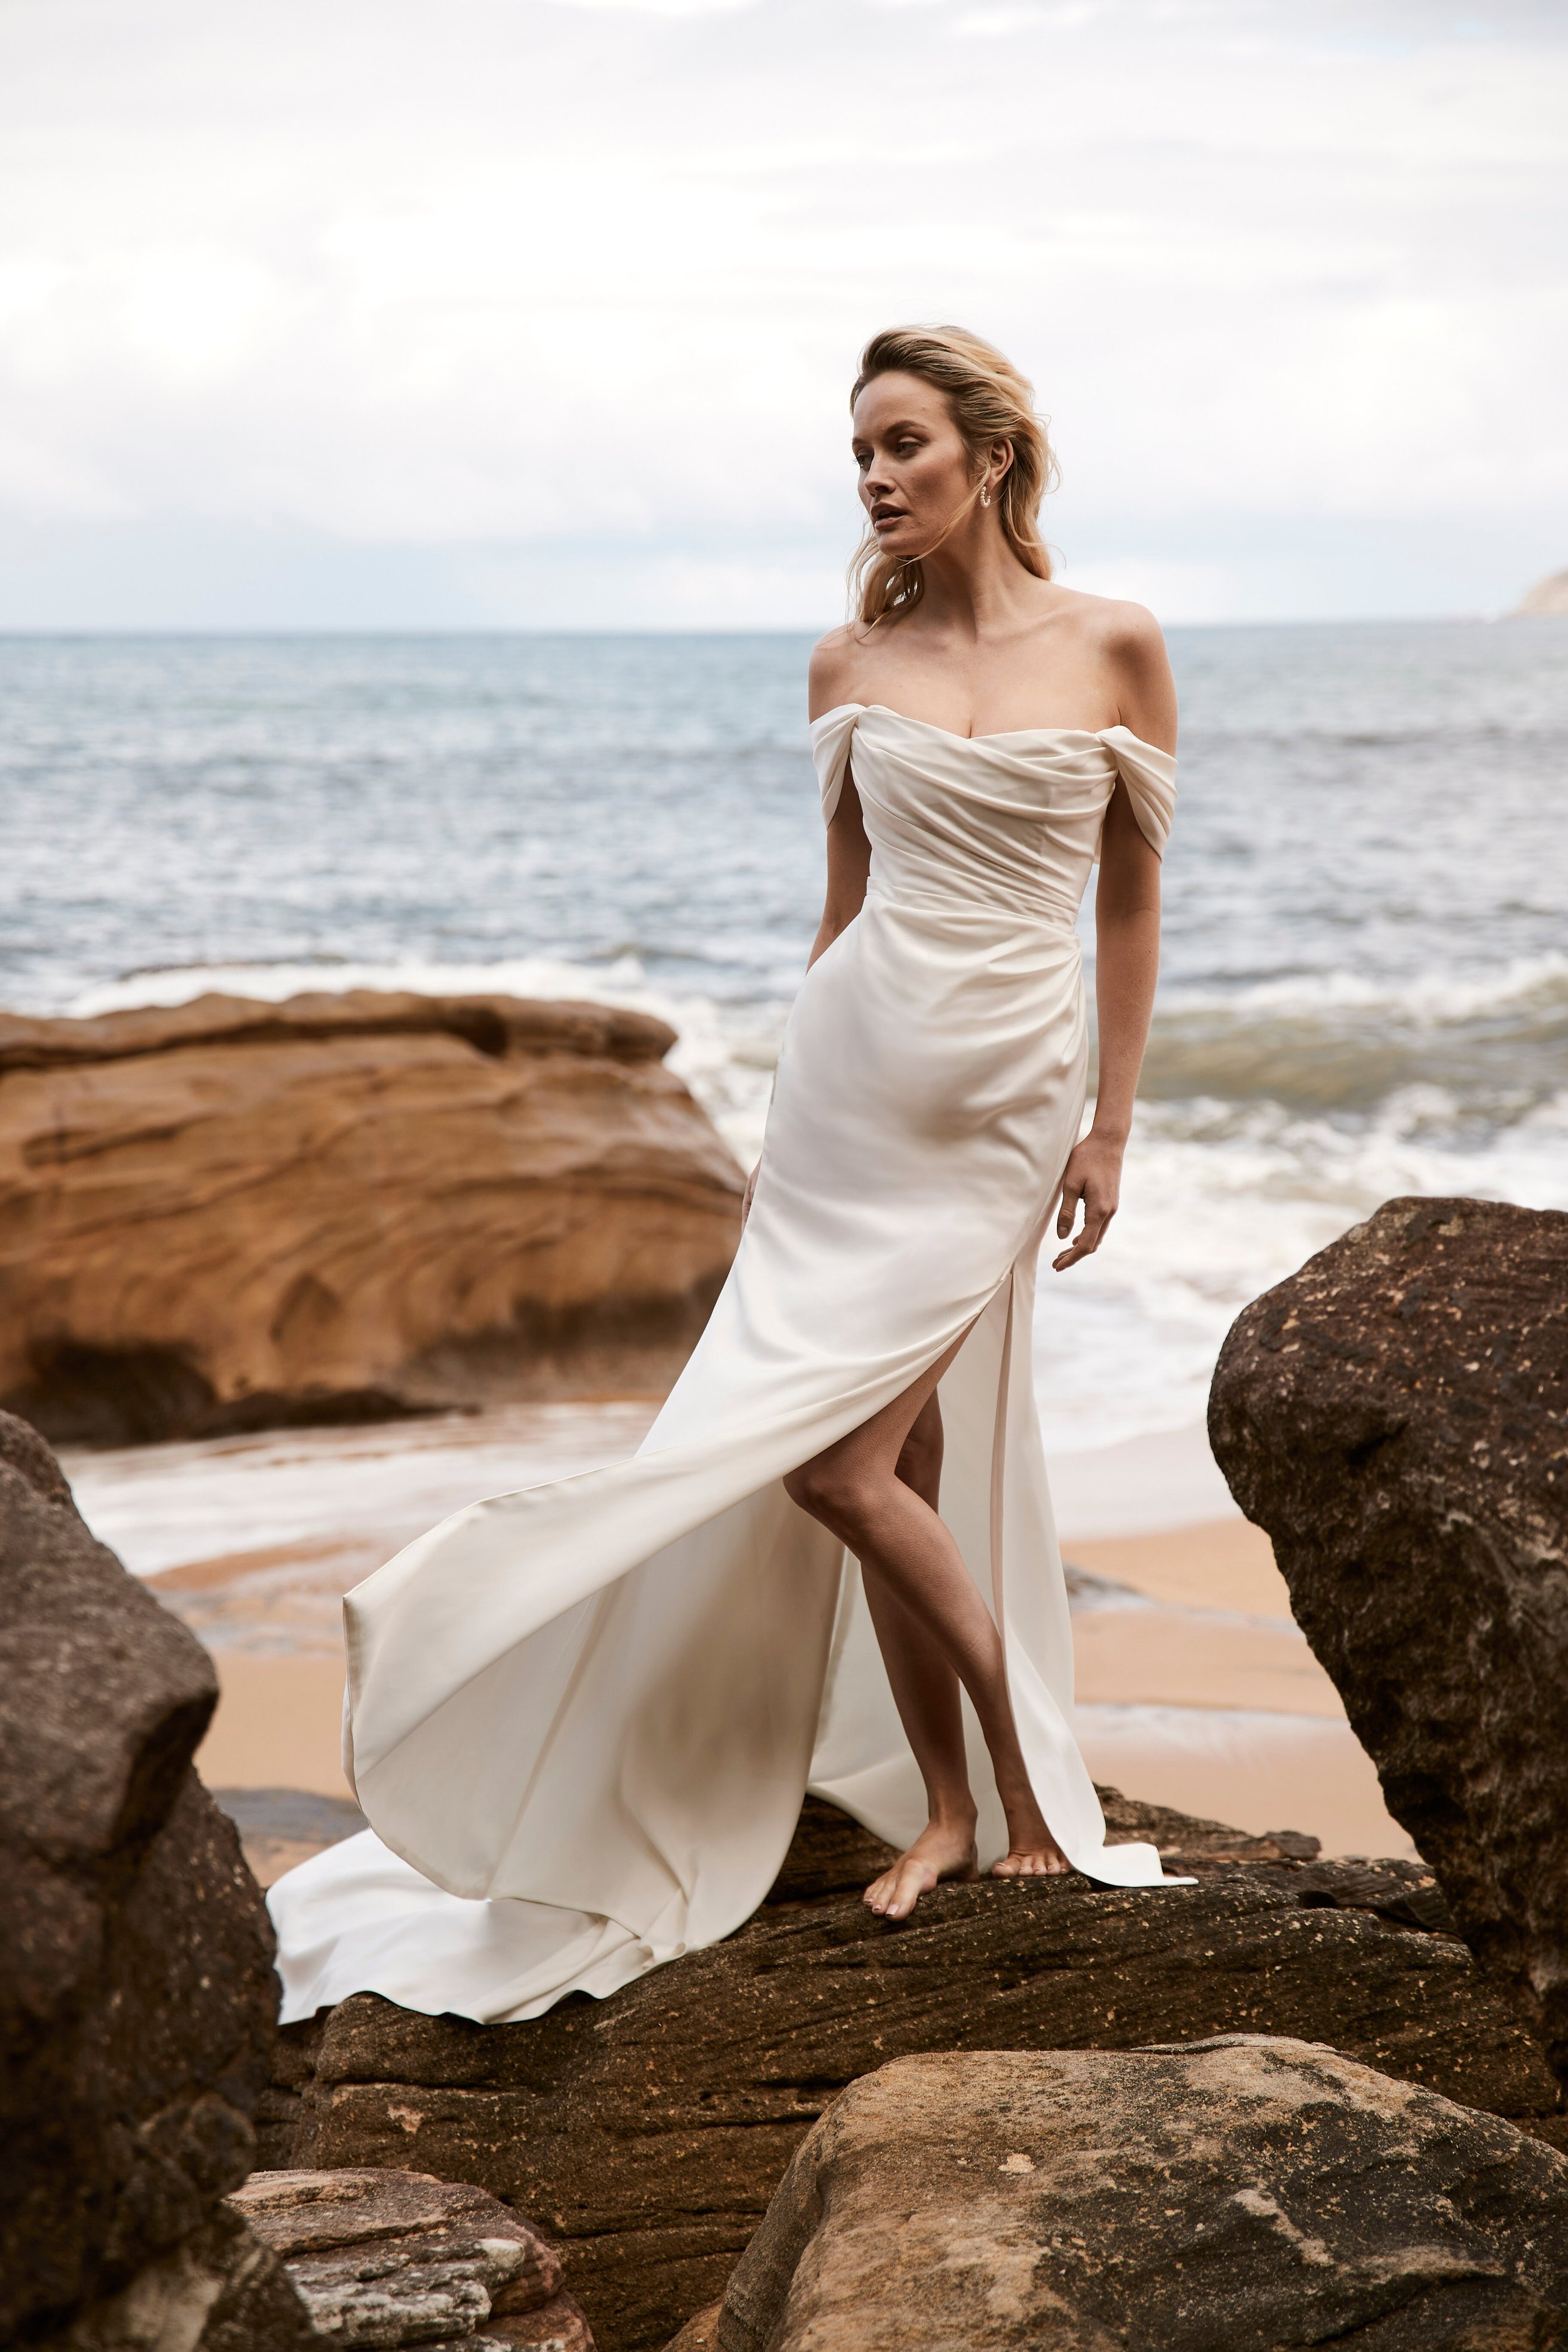 Textured Satin 'The Lennox' Wedding Gown with Ruched Detail - Edited - Edited.jpg